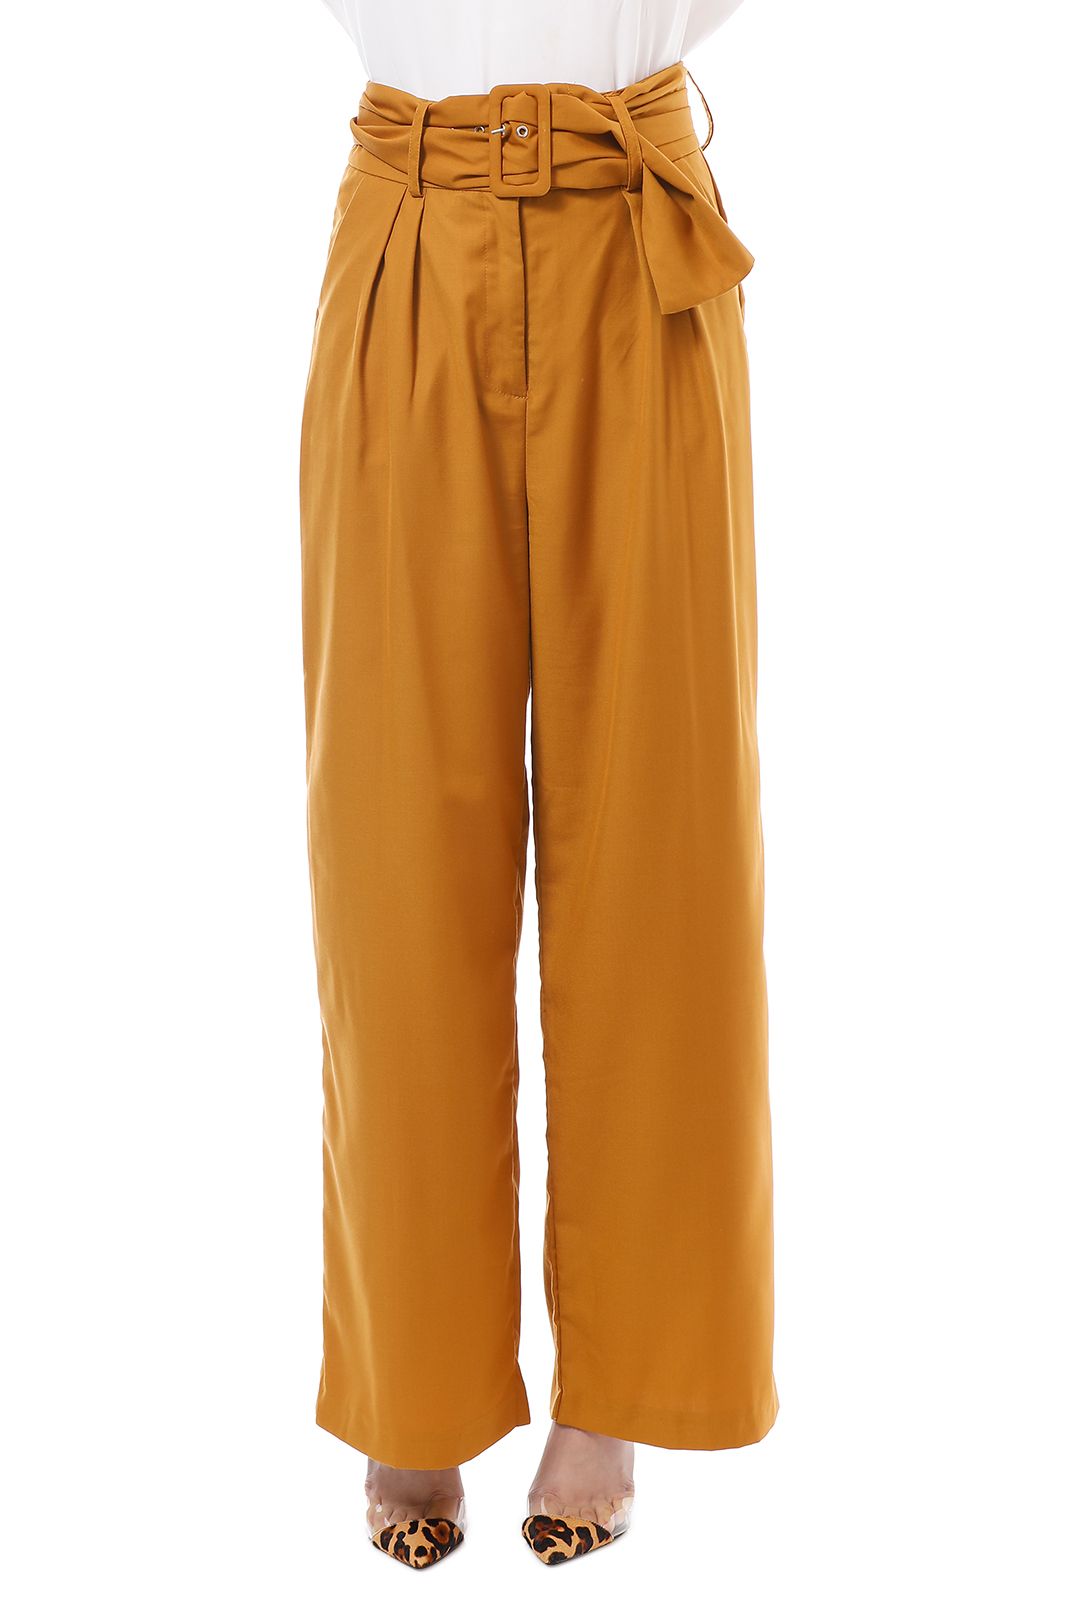 CMEO Collective - The Moments Pant - Yellow - Front Detail